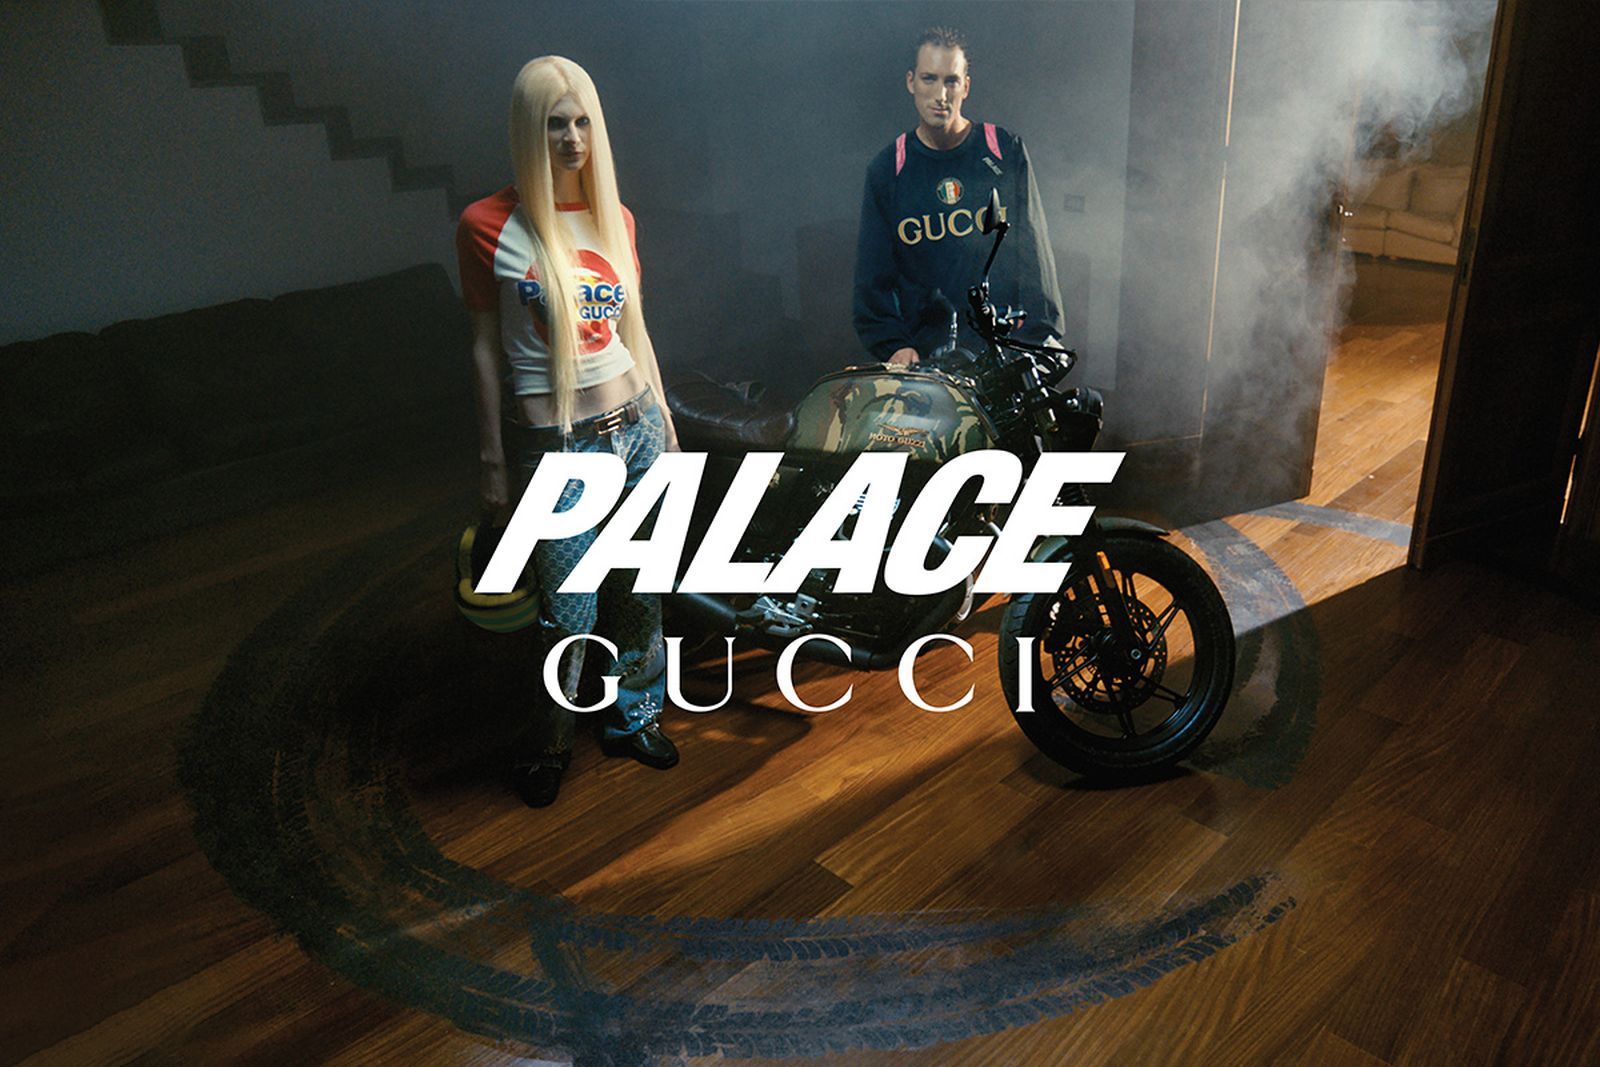 palace-skateboards-gucci-vault-stores-006